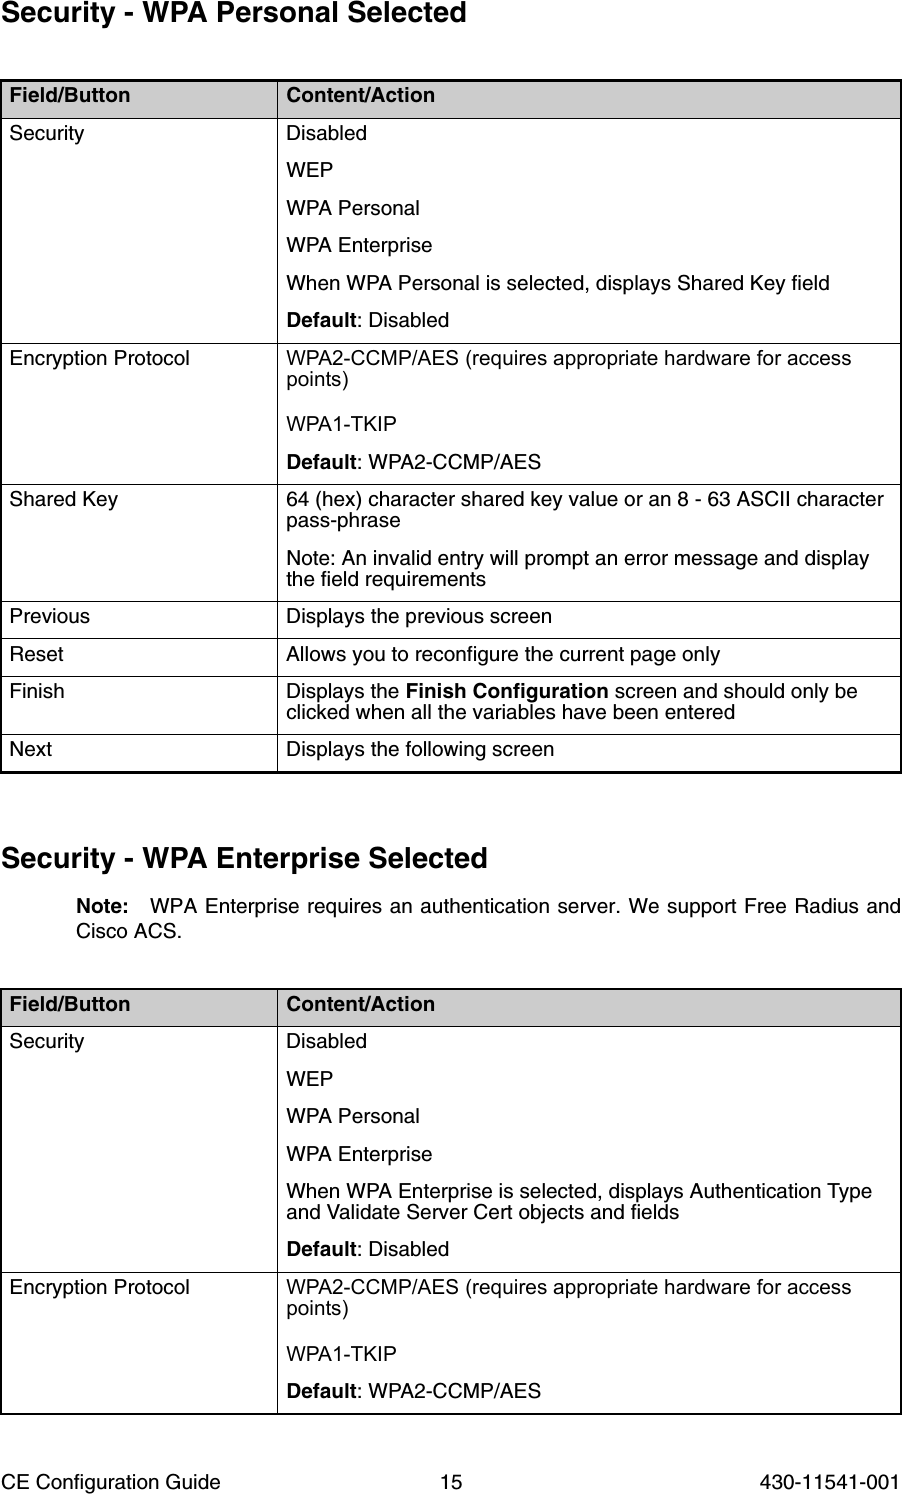 CE Configuration Guide 15 430-11541-001Security - WPA Personal SelectedSecurity - WPA Enterprise SelectedNote: WPA Enterprise requires an authentication server. We support Free Radius andCisco ACS.Field/Button Content/ActionSecurity Disabled WEP WPA Personal WPA EnterpriseWhen WPA Personal is selected, displays Shared Key fieldDefault: DisabledEncryption Protocol WPA2-CCMP/AES (requires appropriate hardware for access points)WPA1-TKIPDefault: WPA2-CCMP/AESShared Key  64 (hex) character shared key value or an 8 - 63 ASCII character pass-phraseNote: An invalid entry will prompt an error message and display the field requirementsPrevious Displays the previous screenReset Allows you to reconfigure the current page onlyFinish Displays the Finish Configuration screen and should only be clicked when all the variables have been enteredNext Displays the following screenField/Button Content/ActionSecurity Disabled WEP WPA Personal WPA EnterpriseWhen WPA Enterprise is selected, displays Authentication Type and Validate Server Cert objects and fieldsDefault: DisabledEncryption Protocol WPA2-CCMP/AES (requires appropriate hardware for access points)WPA1-TKIPDefault: WPA2-CCMP/AES